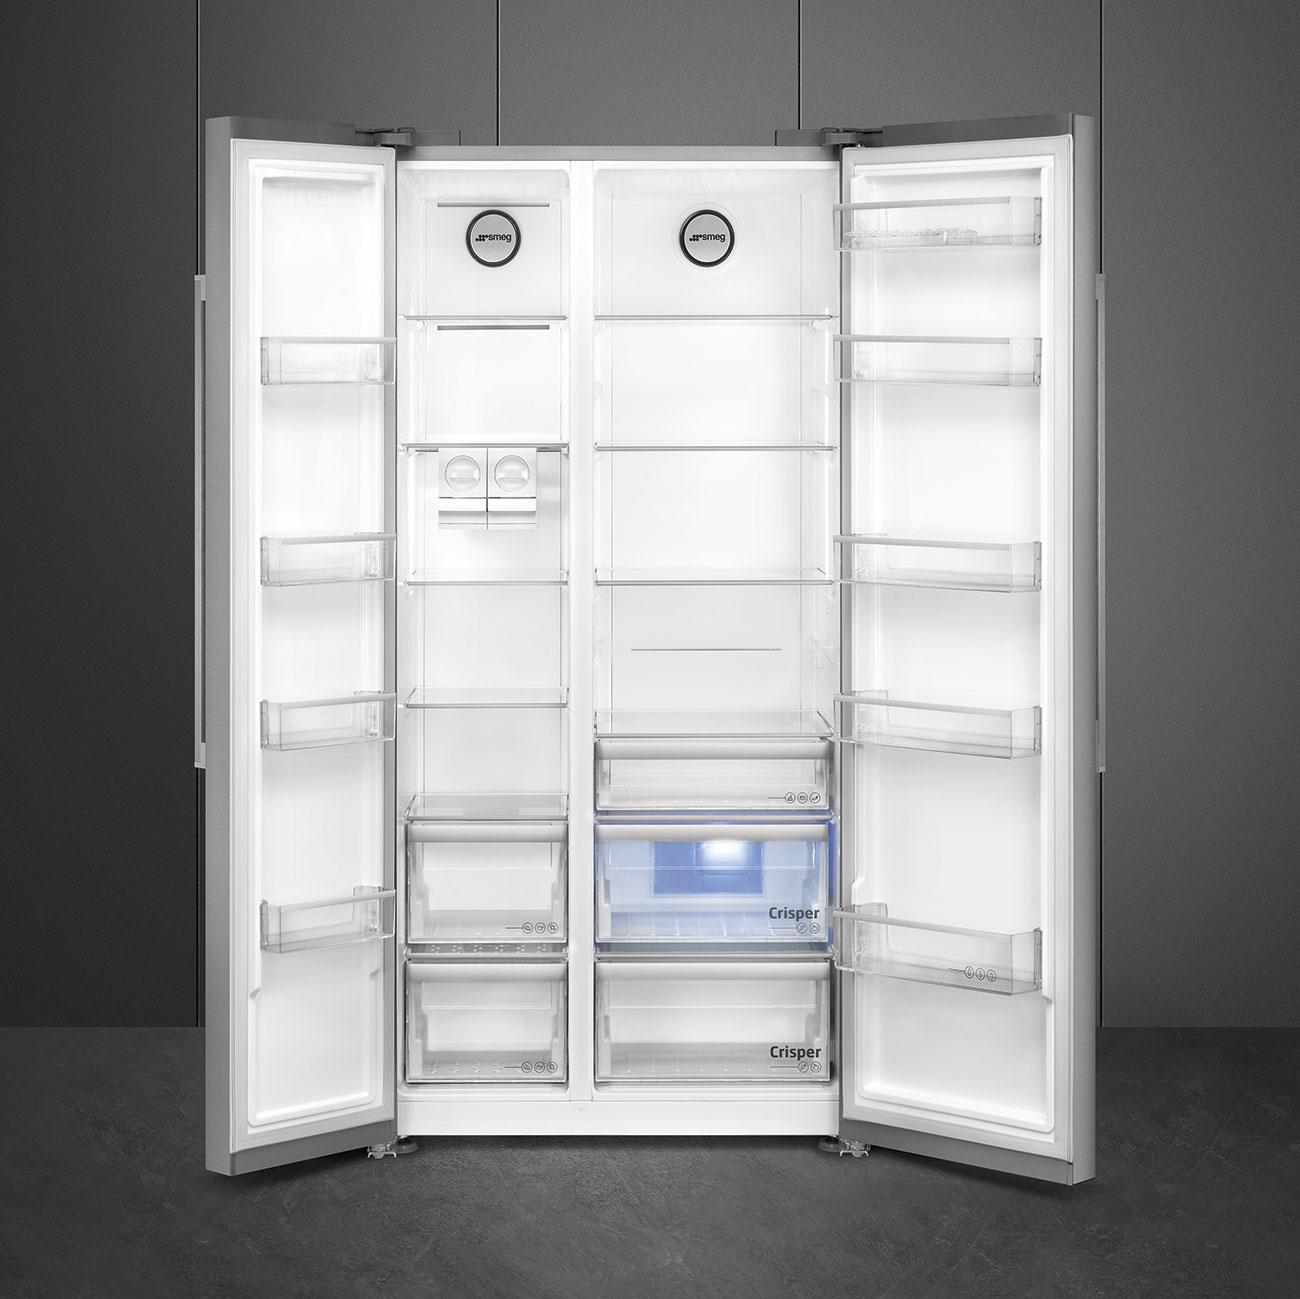 Side-by-side Free standing refrigerator - Smeg_2